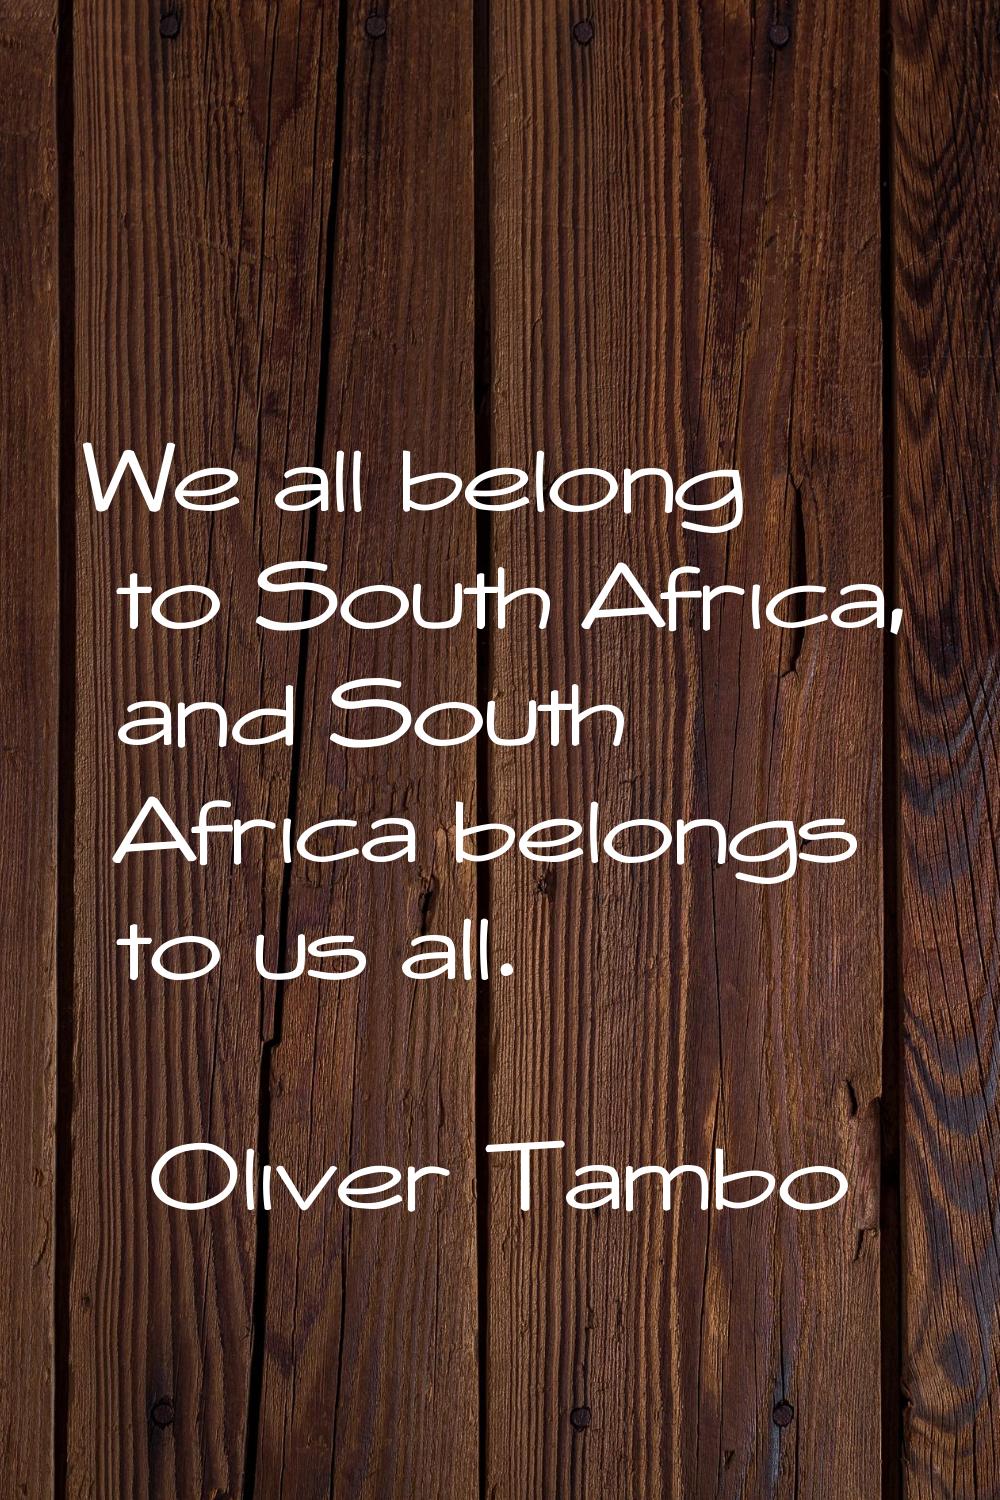 We all belong to South Africa, and South Africa belongs to us all.